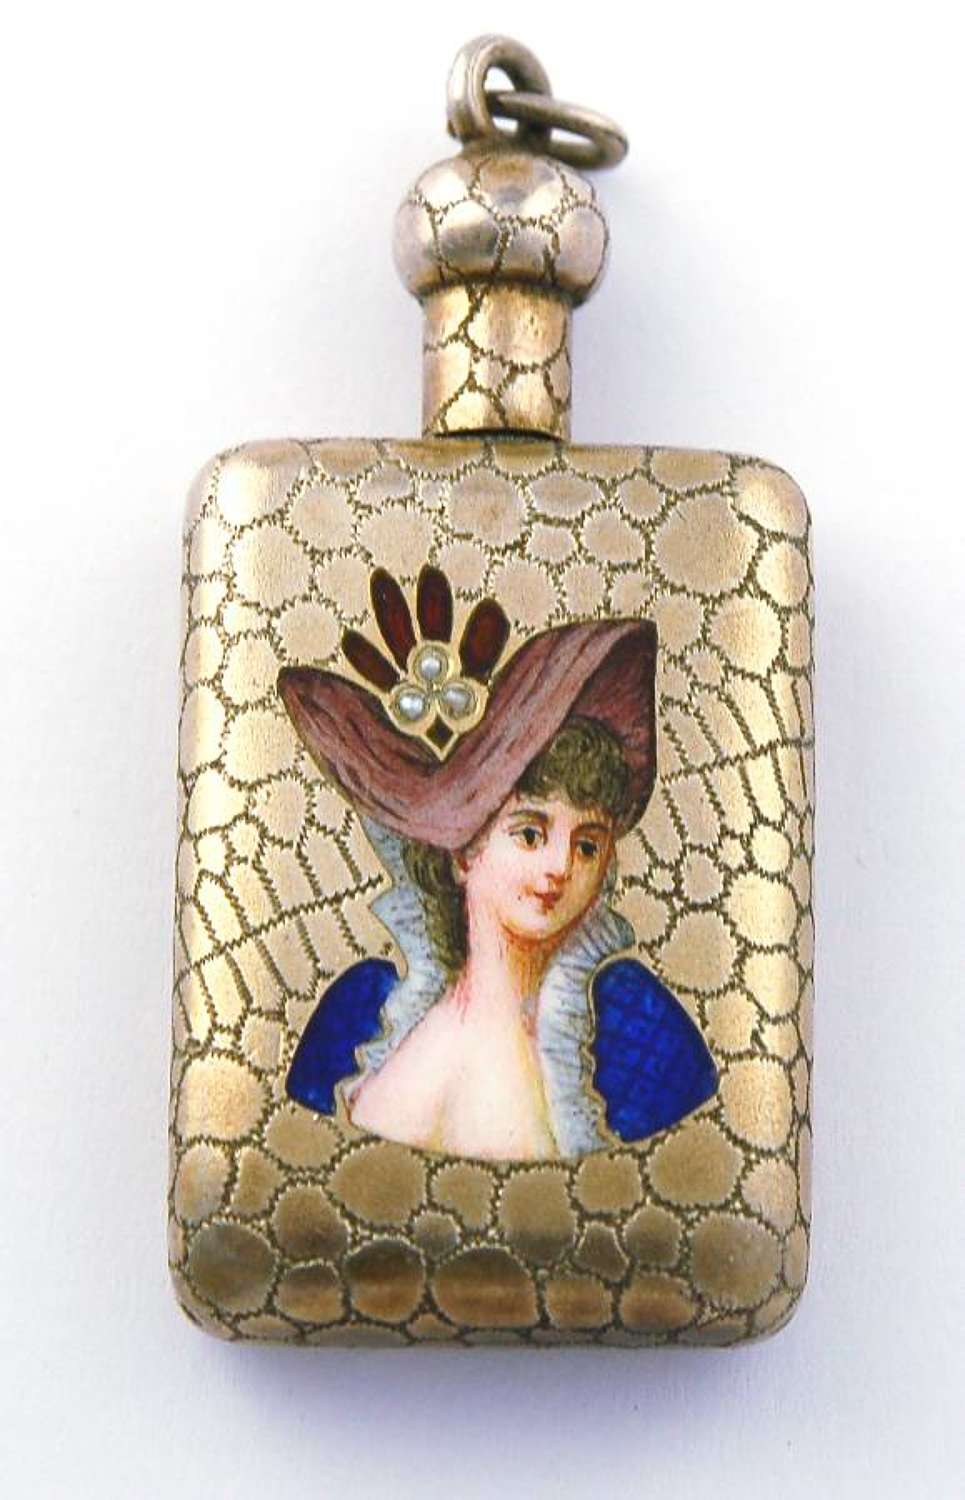 Vienna silver and enamel lady